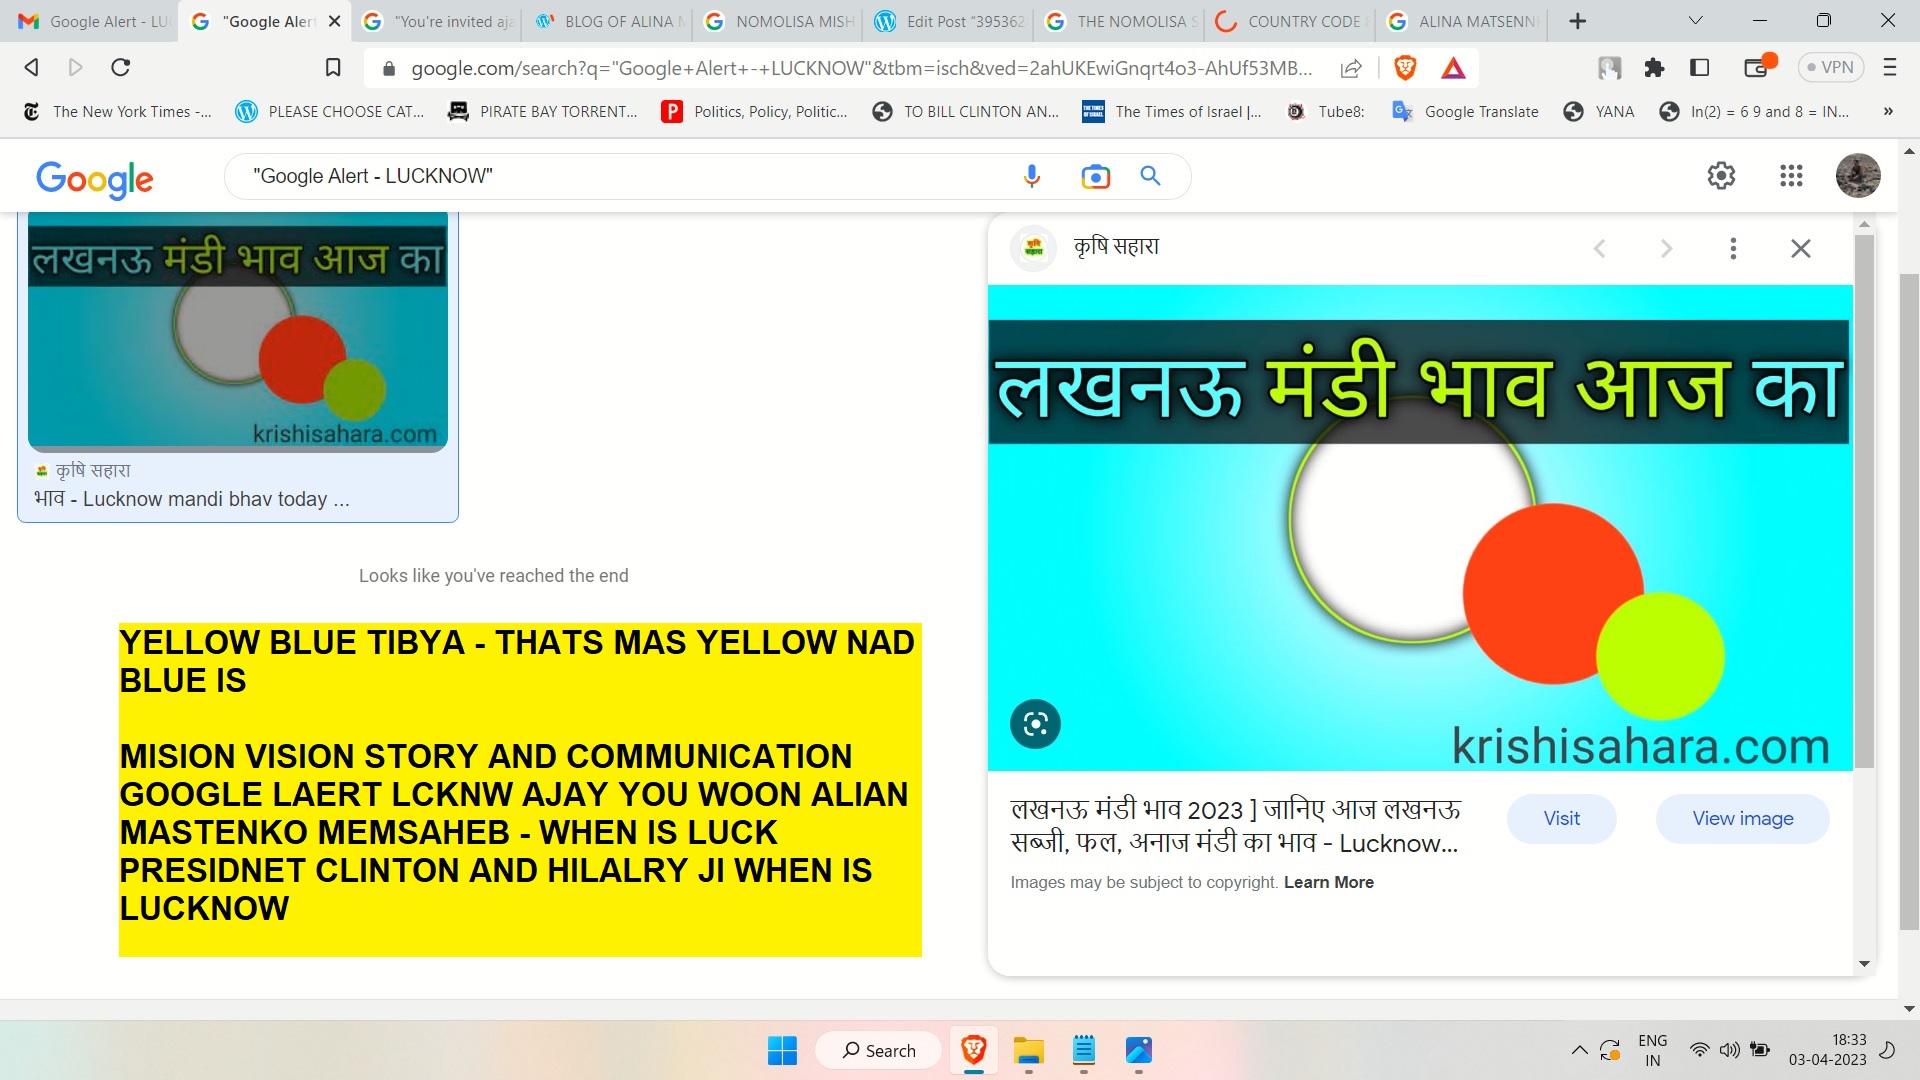 MISION VISION STORY AND COMMUNICATION GOOGLE LAERT LCKNW AJAY YOU WOON ALIAN MASTENKO MEMSAHEB - WHEN IS LUCK PRESIDNET CLINTON AND HILALRY JI WHEN IS LUCKNOW